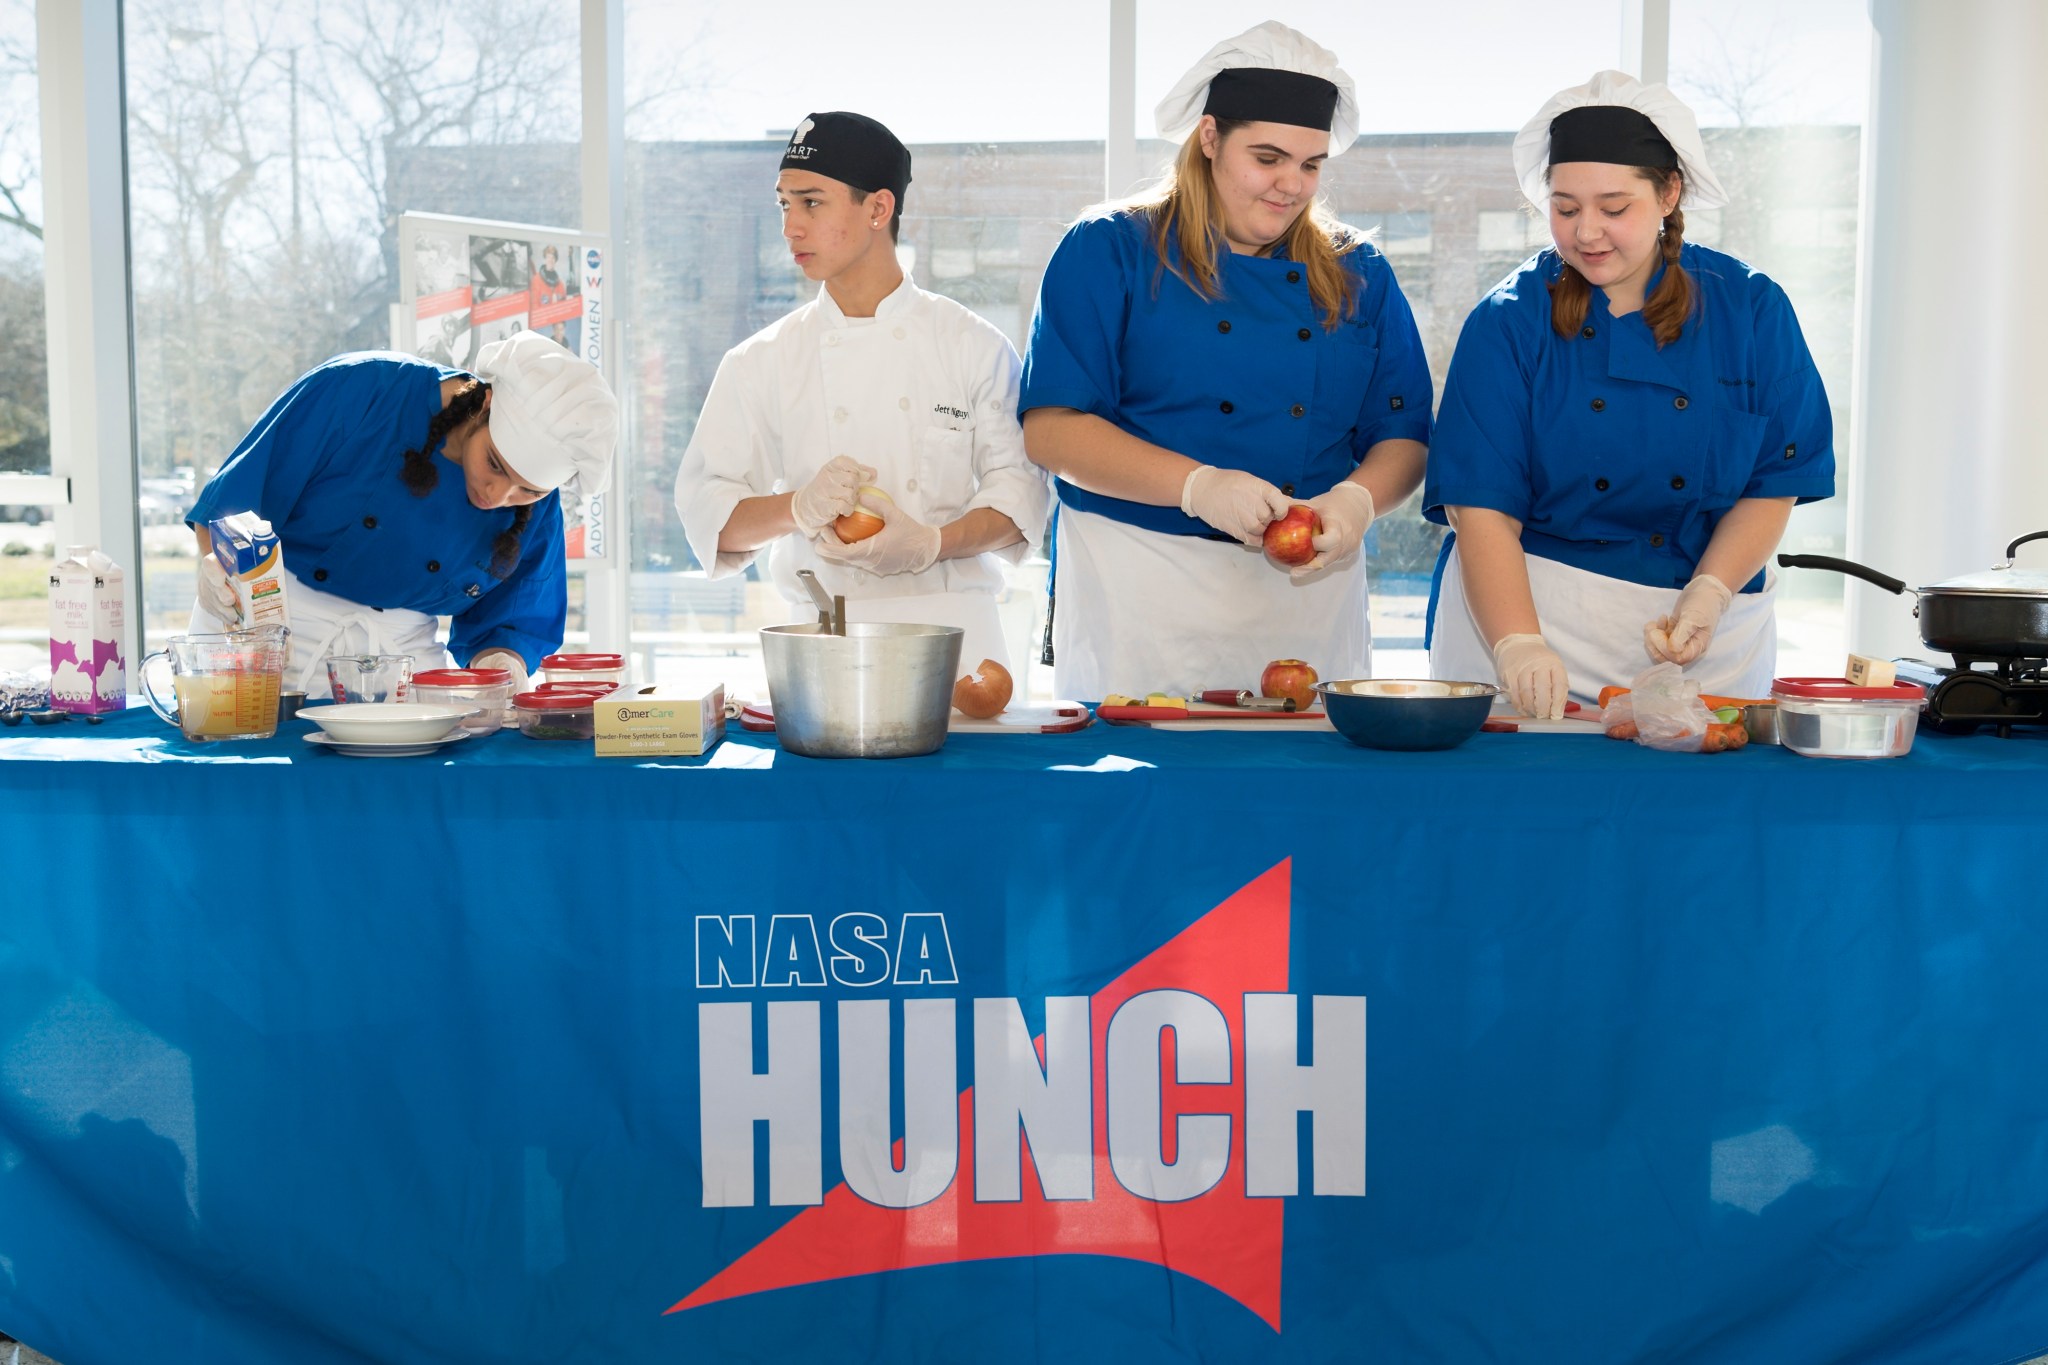 A team of students from New Horizons Woodside Technical Education Center take part in NASA Langley's HUNCH Culinary Challenge.